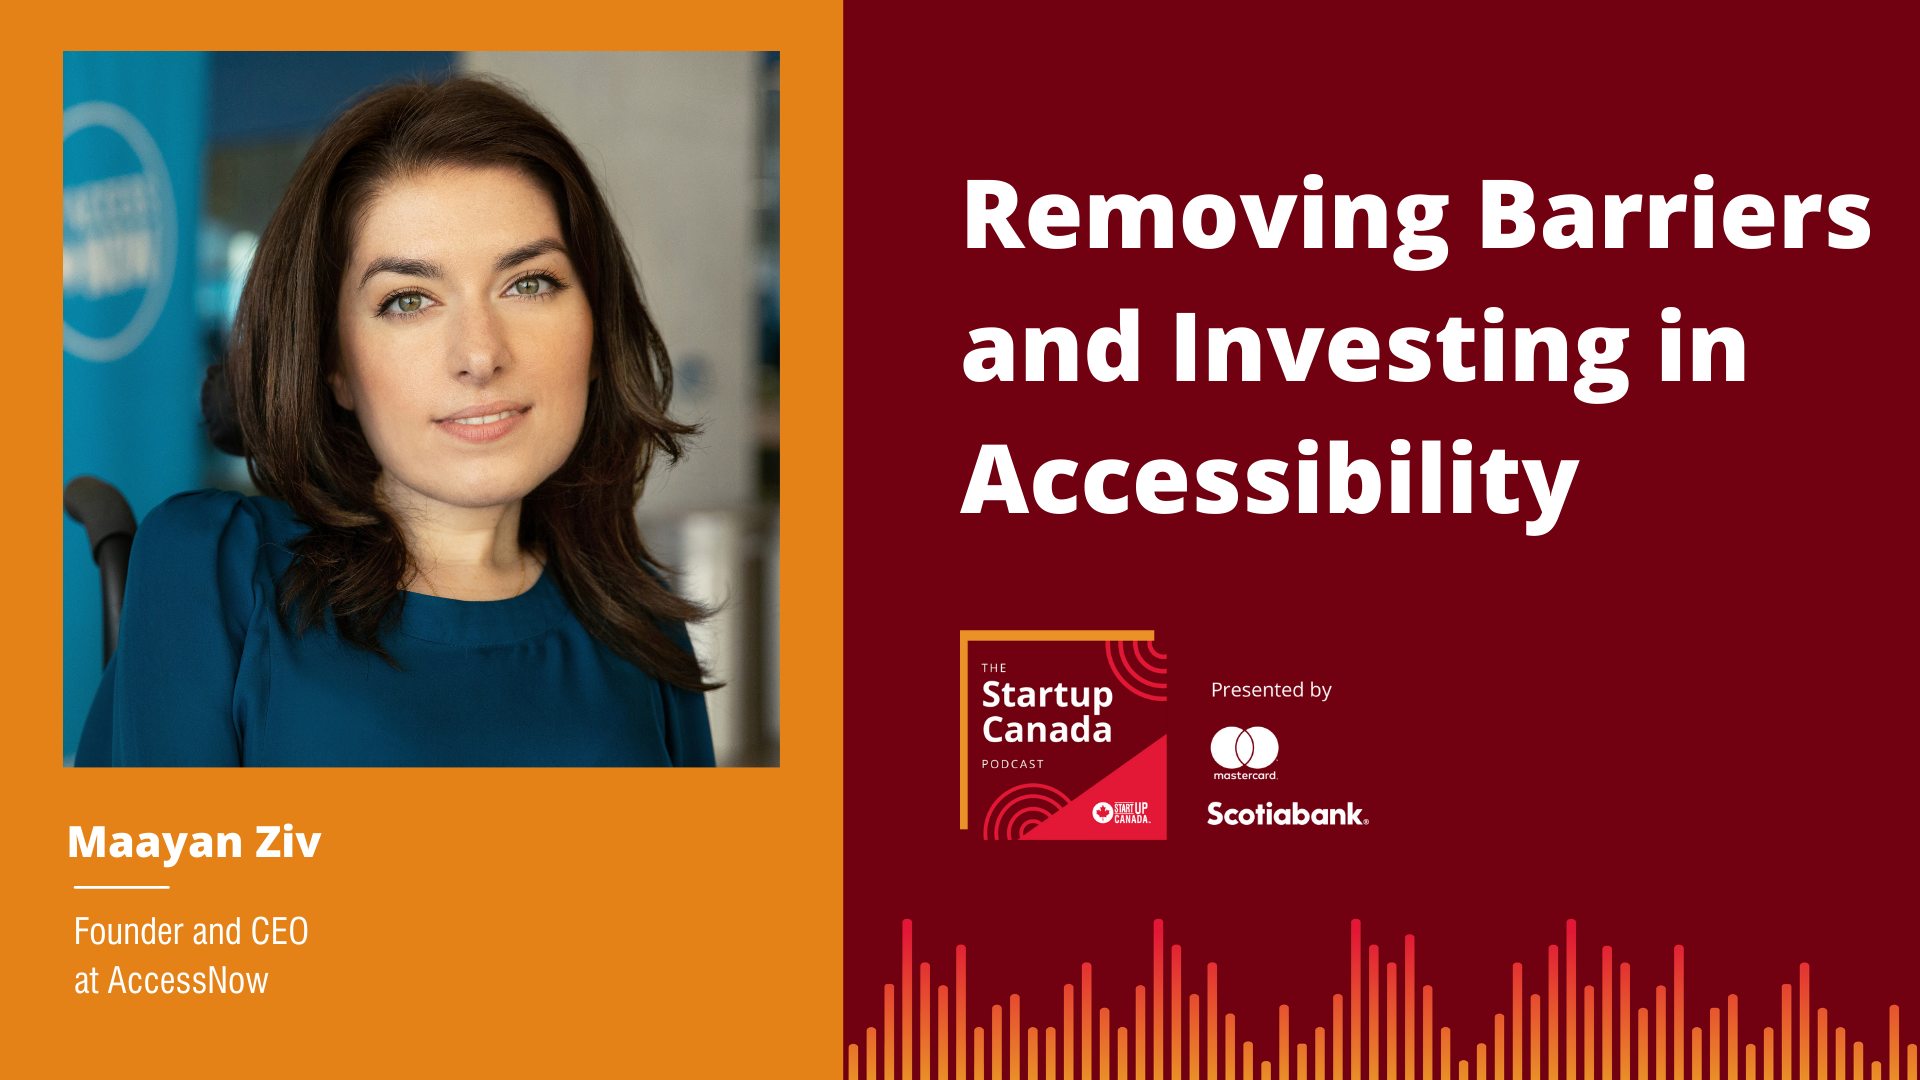 Headshot of Maayan Ziv. Text reads, &quot;Maayan Ziv, Founder and CEO at AccessNow. Removing Barriers and Investing in Accessibility with Maayan Ziv.&quot; The Startup Canada Podcast logo. Presented by Mastercard and Scotiabank.